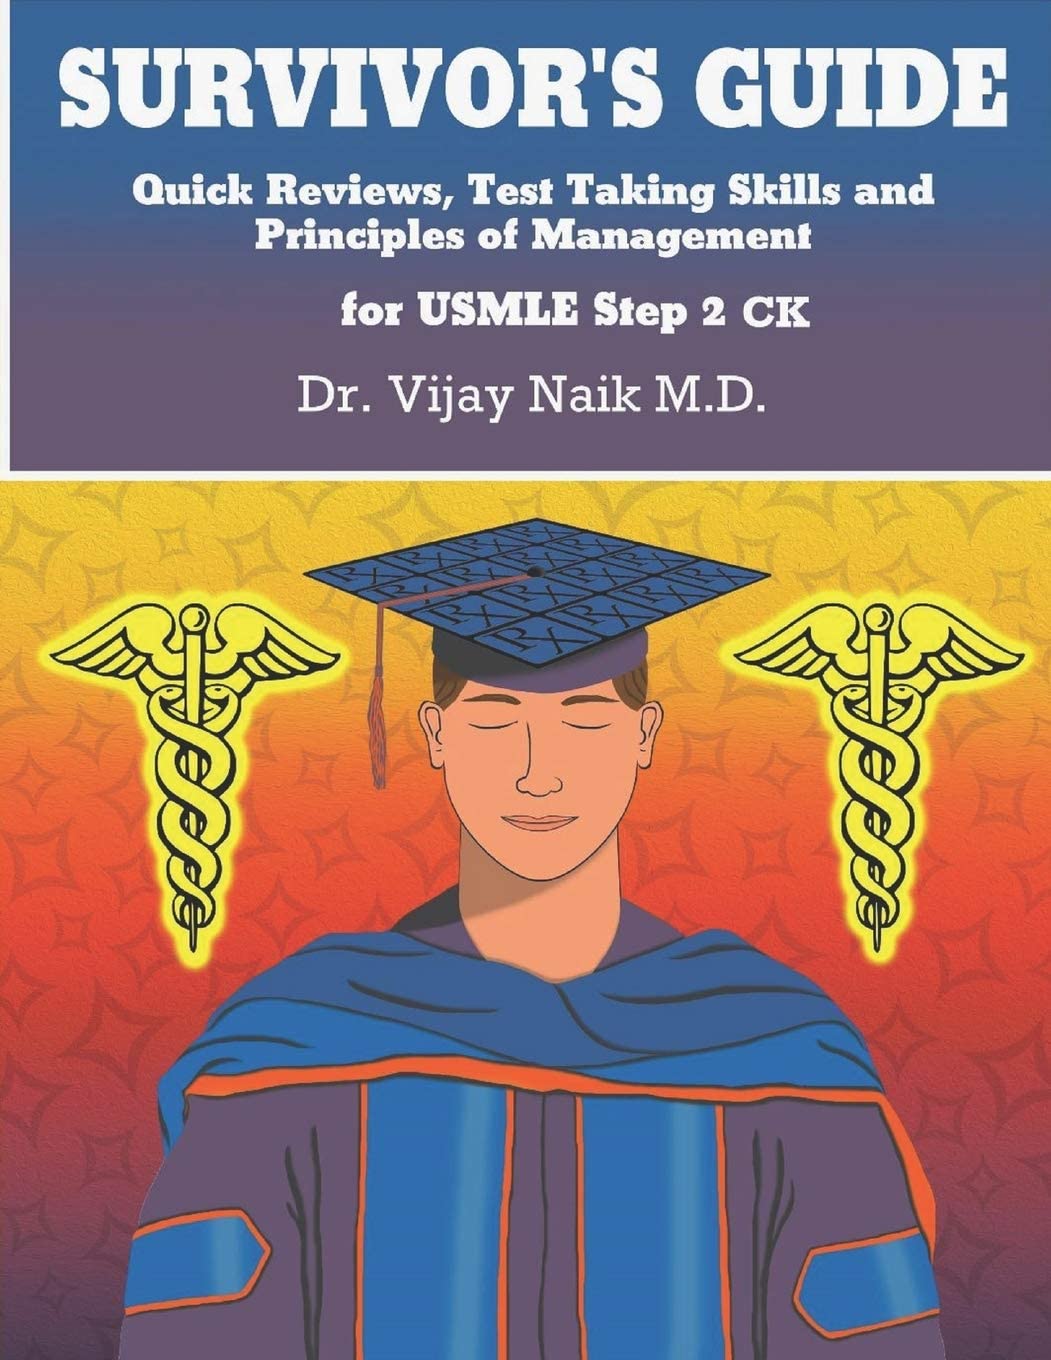 SURVIVOR’S GUIDE Quick Reviews and Test Taking Skills for USMLE STEP 2CK.